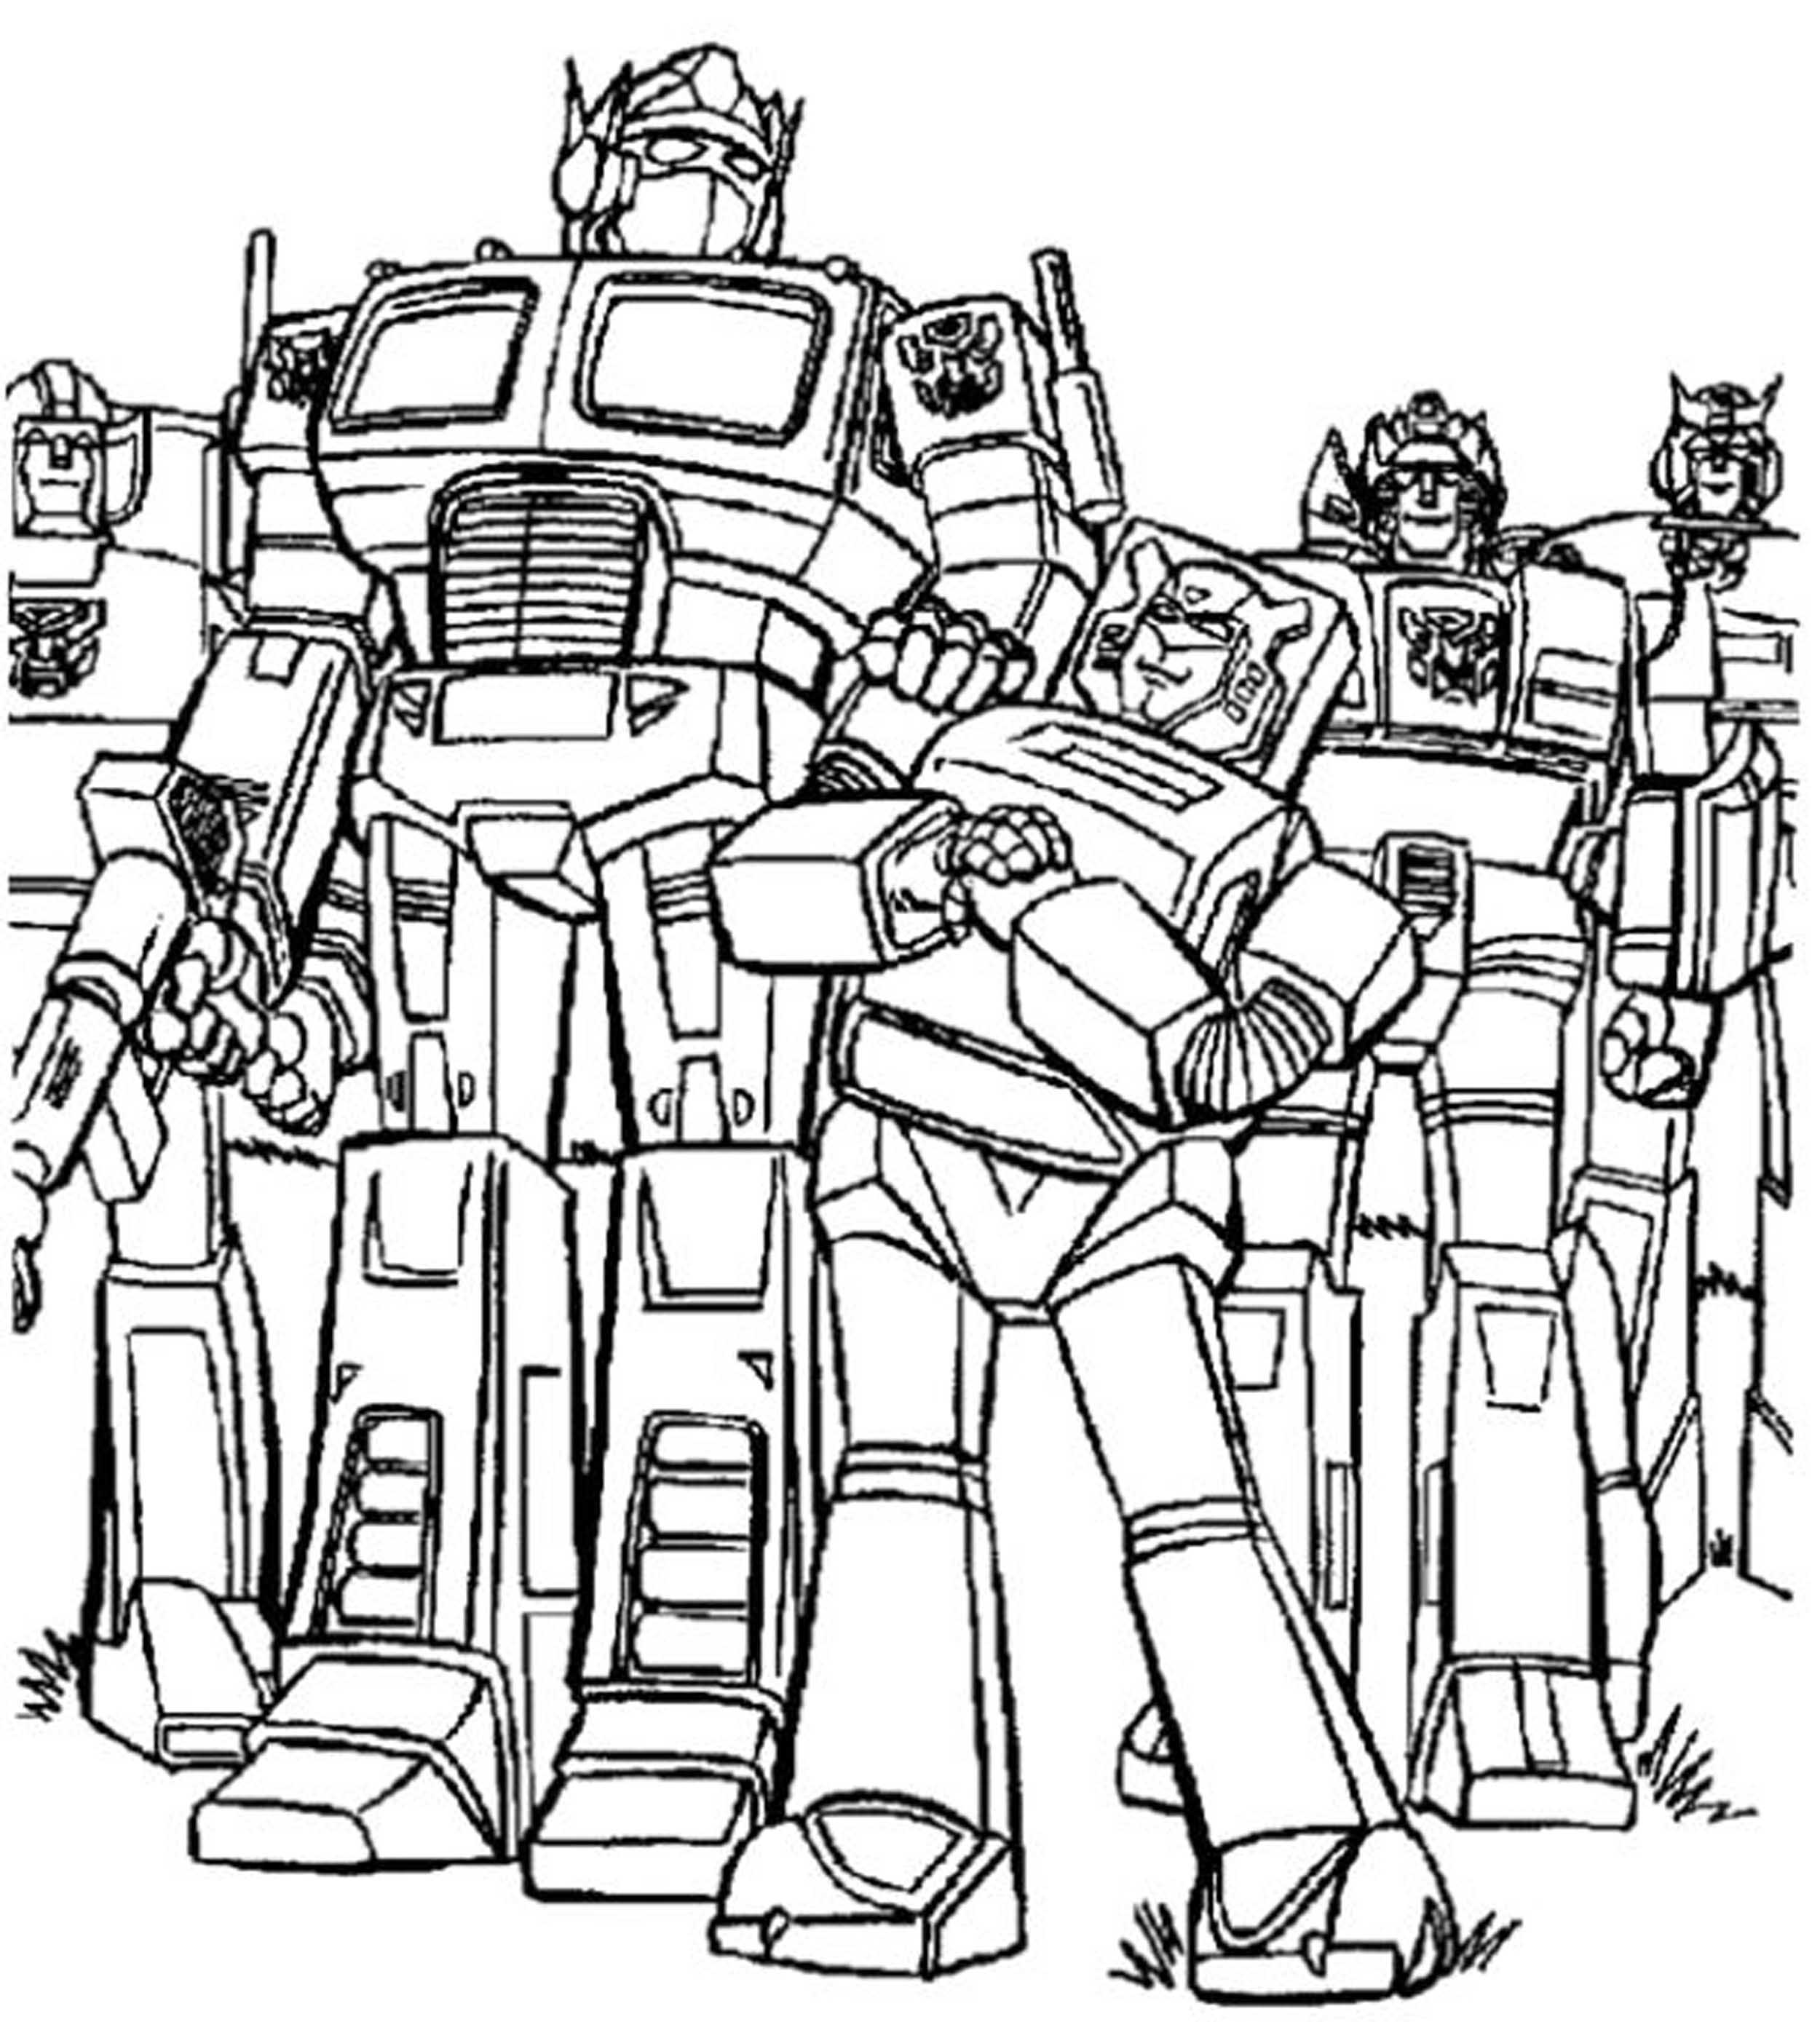 Download Print & Download - Inviting Kids to Do the Transformers ...